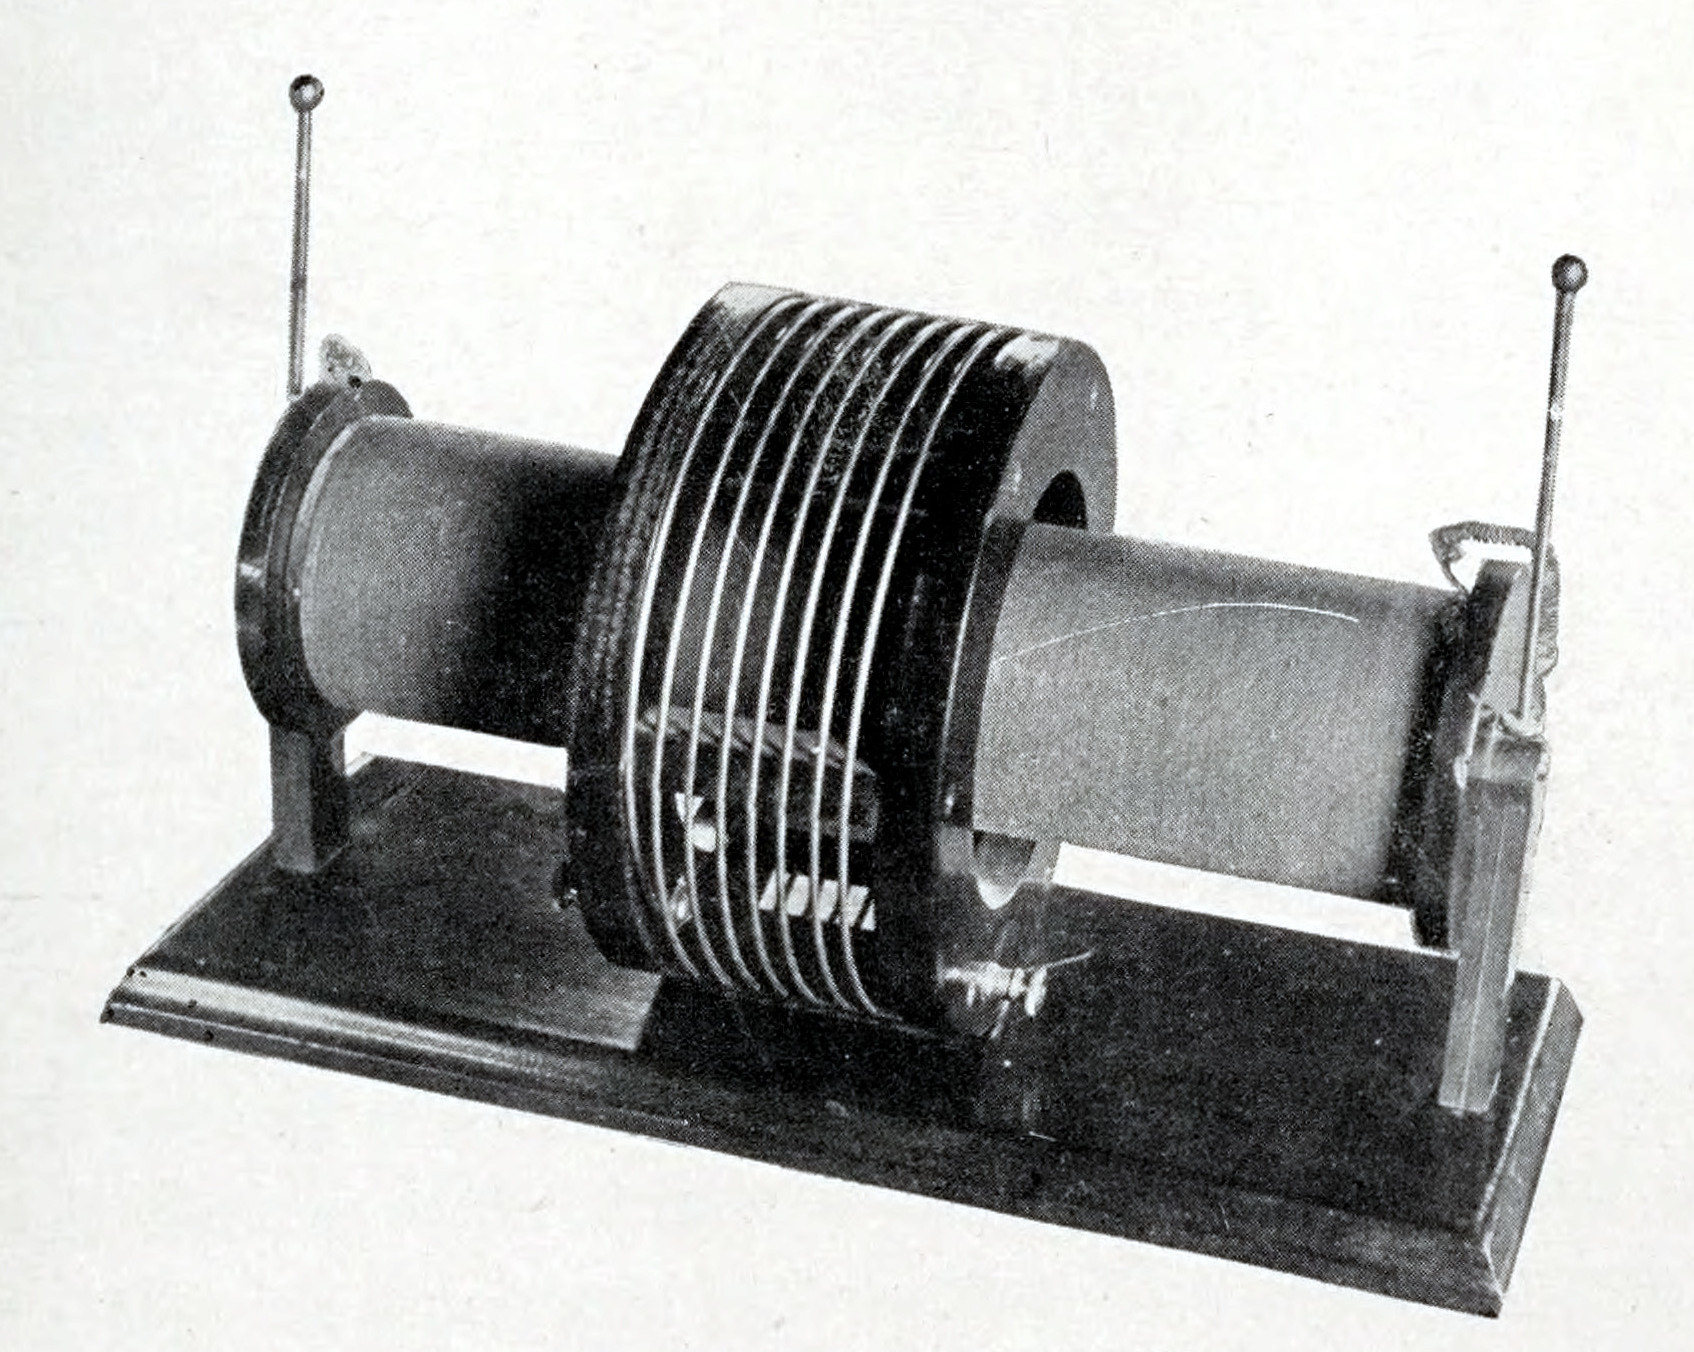 THE TESLA HIGH FREQUENCY COIL.